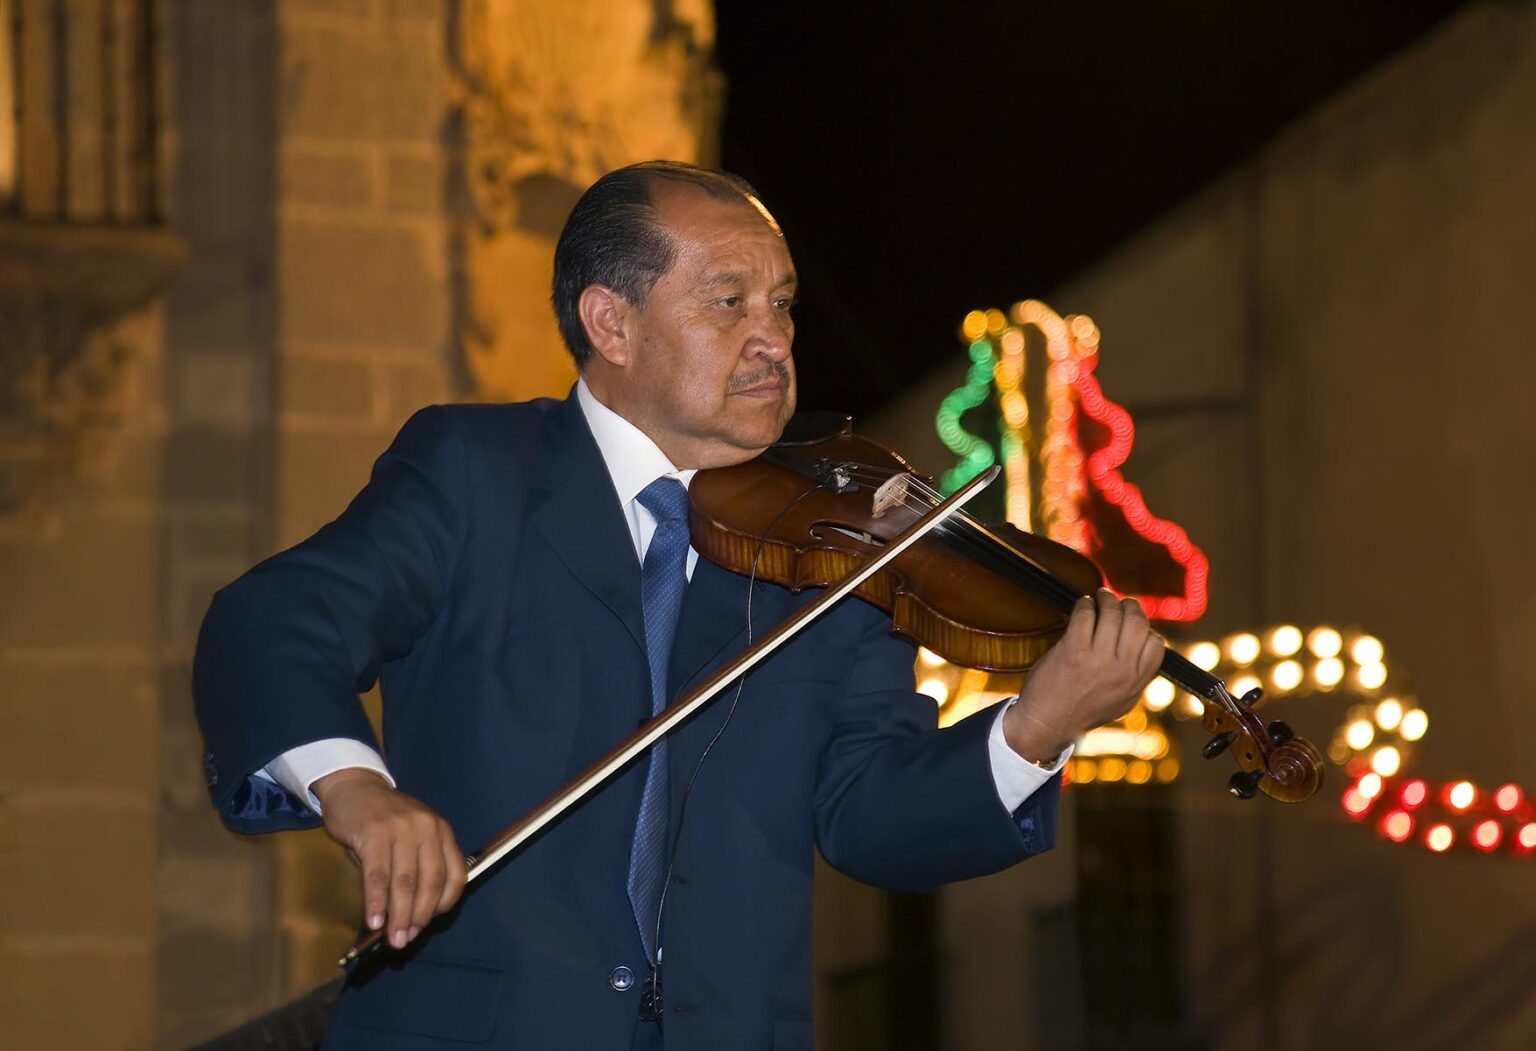 A VIOLINIST preforms in the Central Plaza or Jardin during the Fiesta of San Miguel Archangel held in September - SAN MIGUEL DE ALLENDE, MEXICO